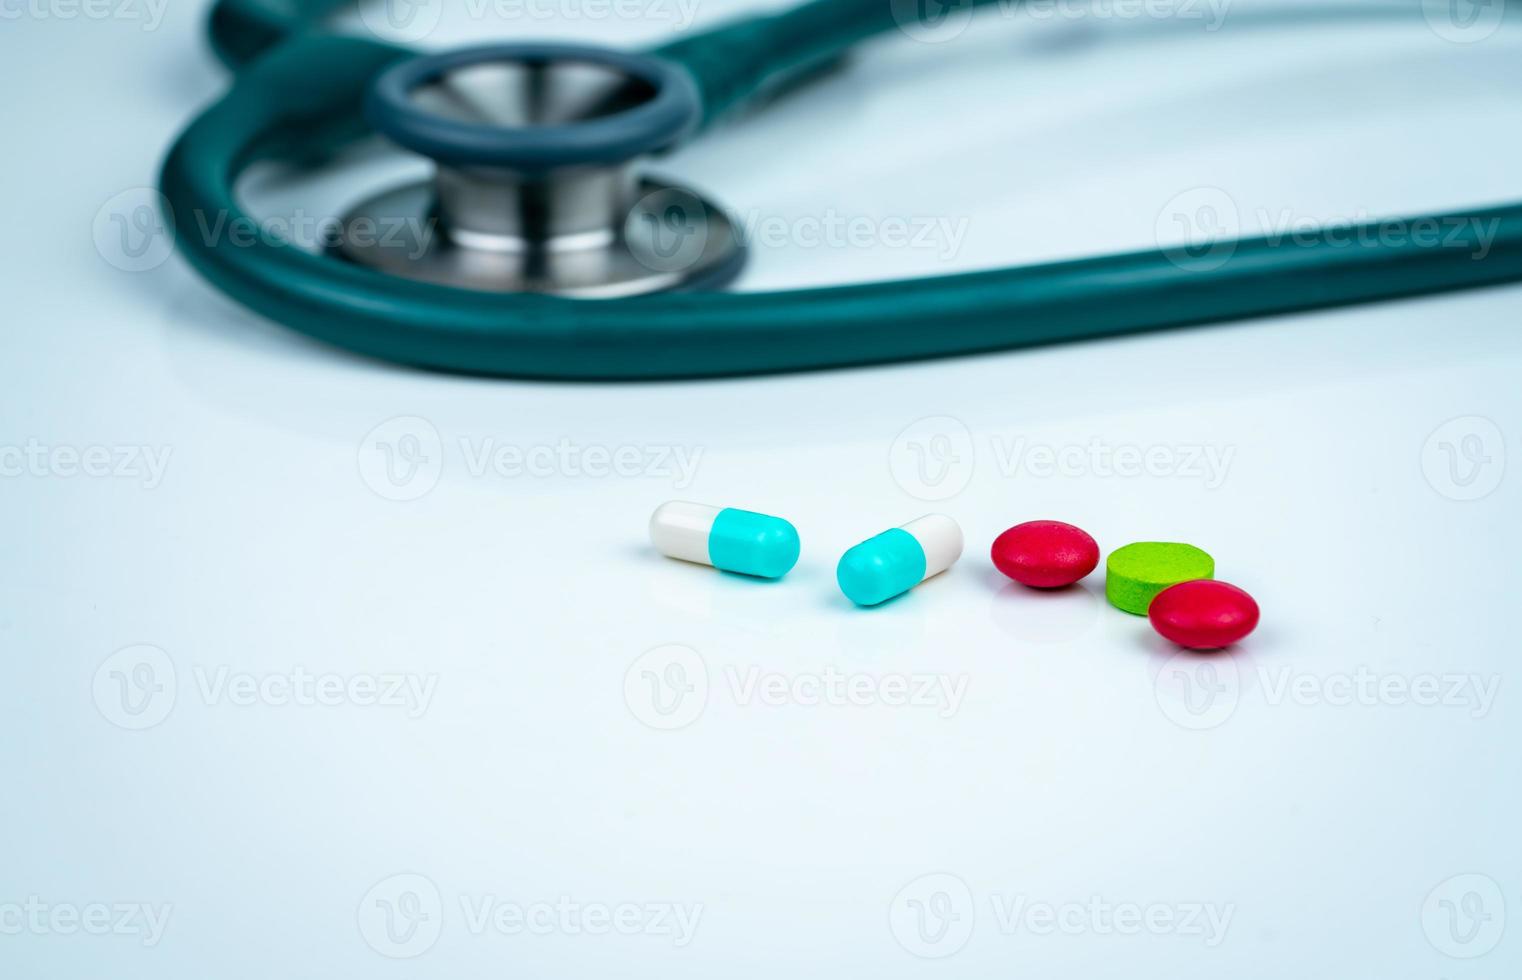 Stethoscope, capsule, and tablets pills on doctor table or nurse desk. Health checkup. Medical healthcare and medicine background. Physician tool for patient diagnosis. Cardiology doctor equipment. photo